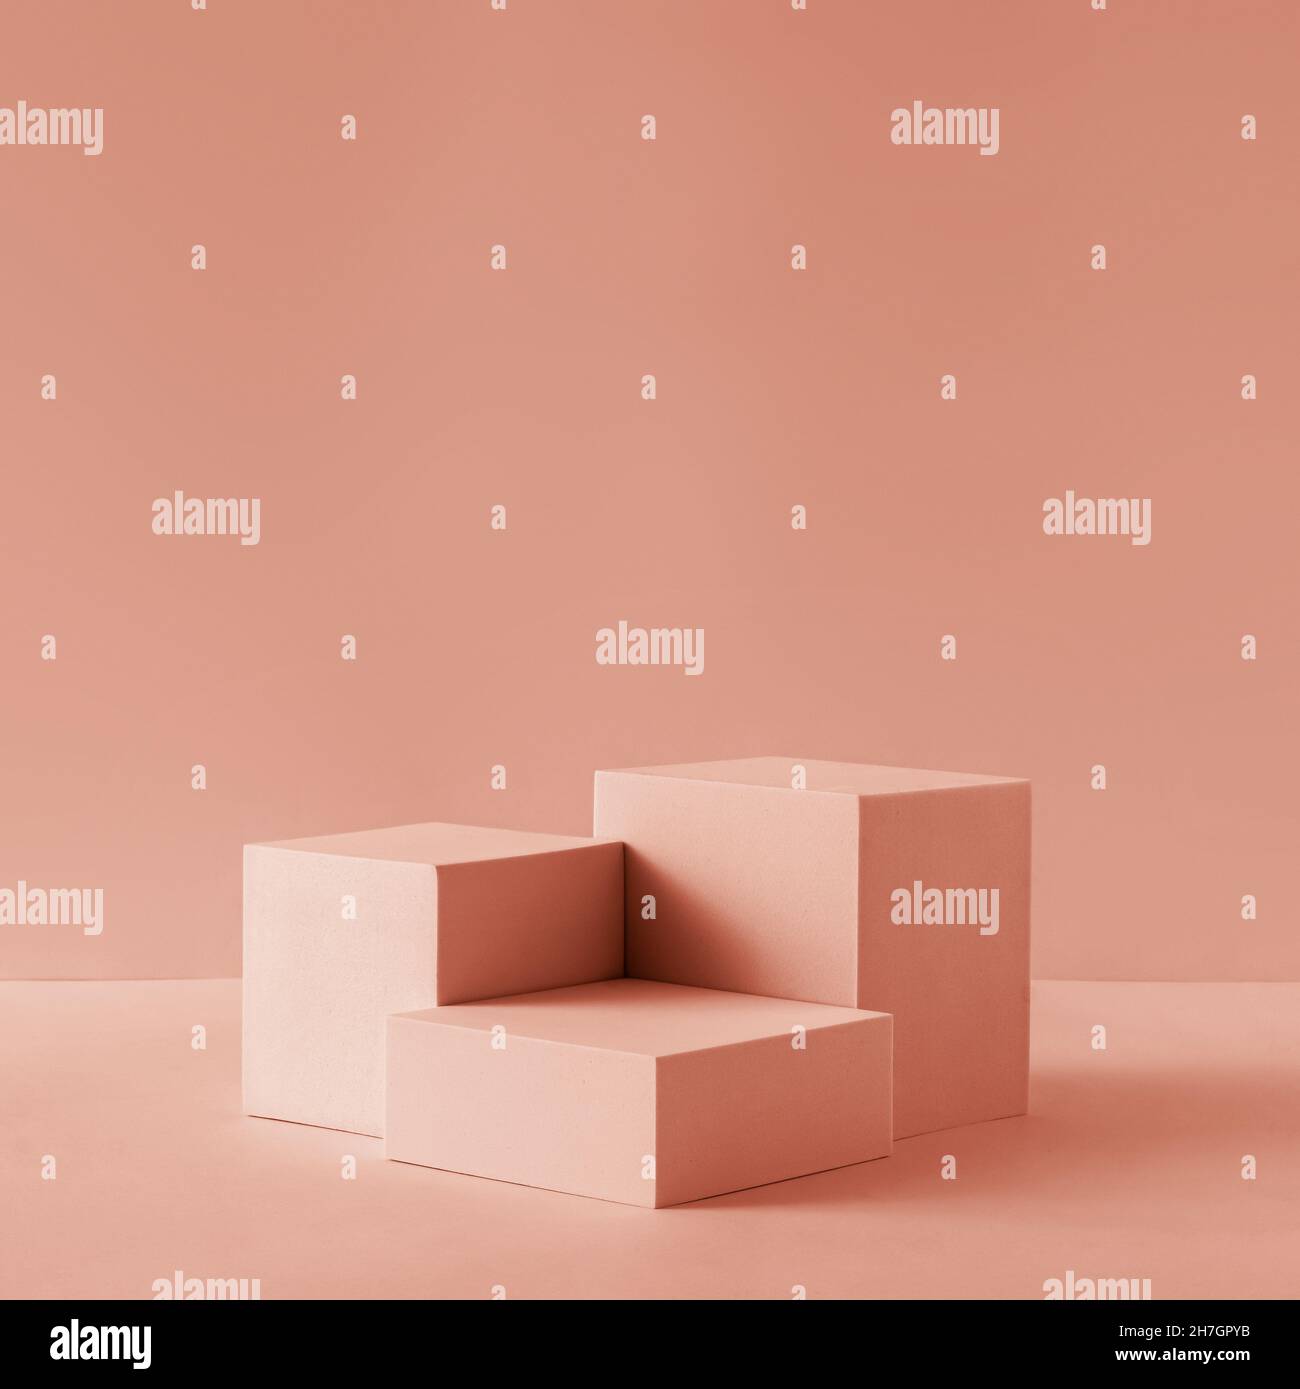 Awarding podium made of three 3d pastel square shapes of different sized against blank pink background for copy space Stock Photo